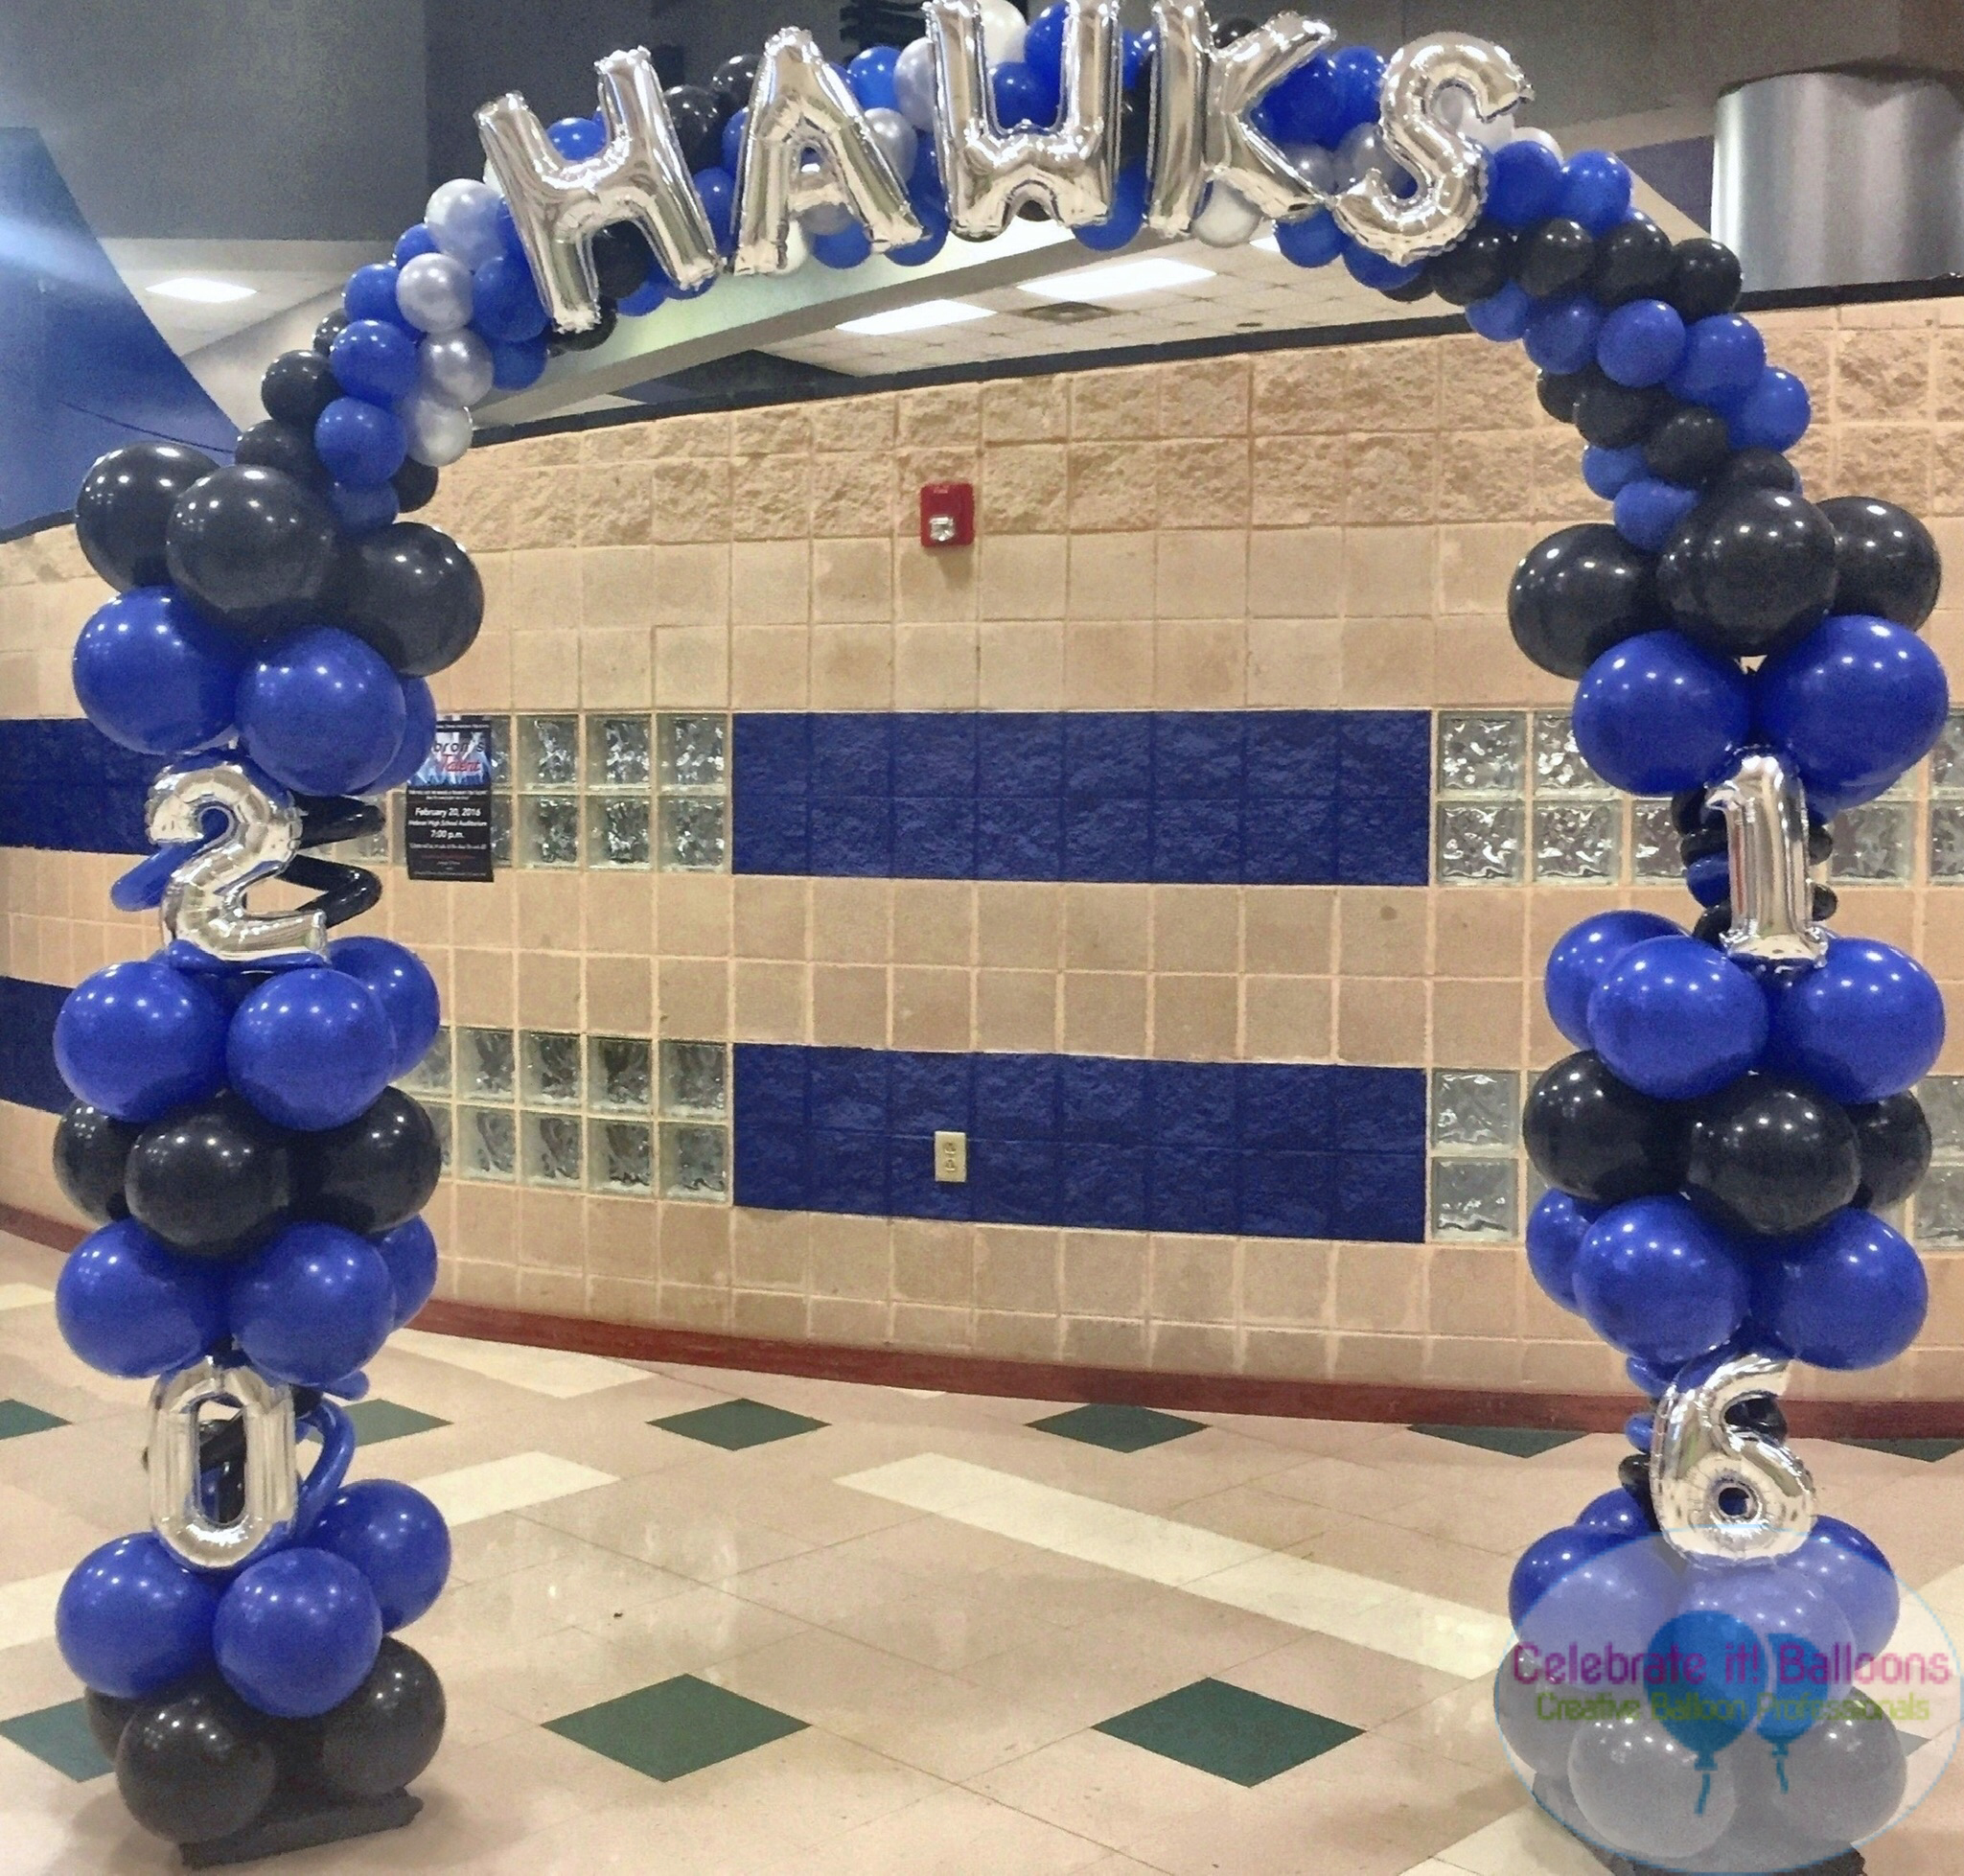 Royal blue, black and silver balloon arch with balloon letters